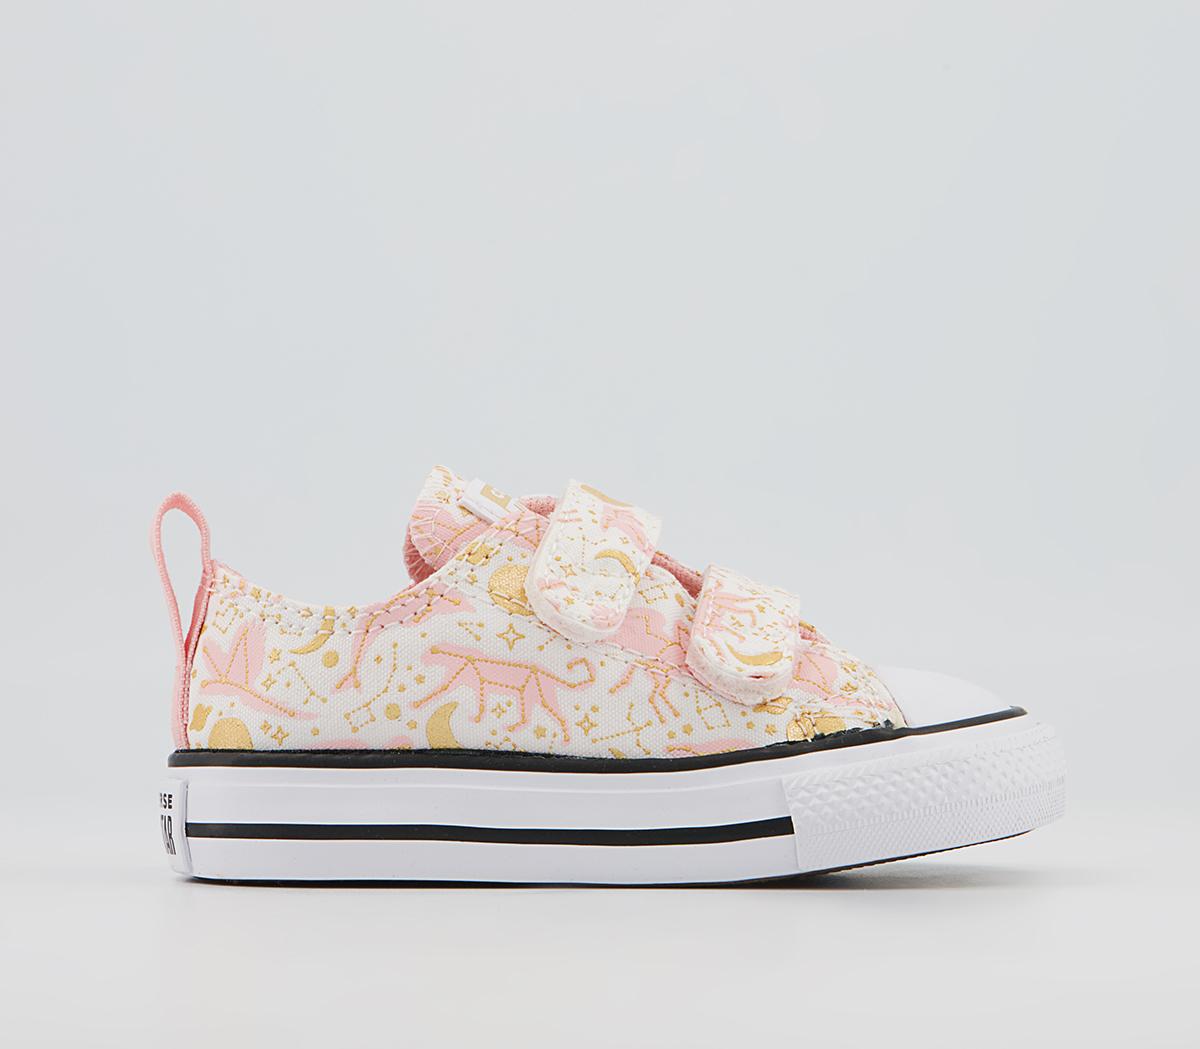 ConverseAll Star 2vlace TrainersWhite Storm Pink Gold Stars